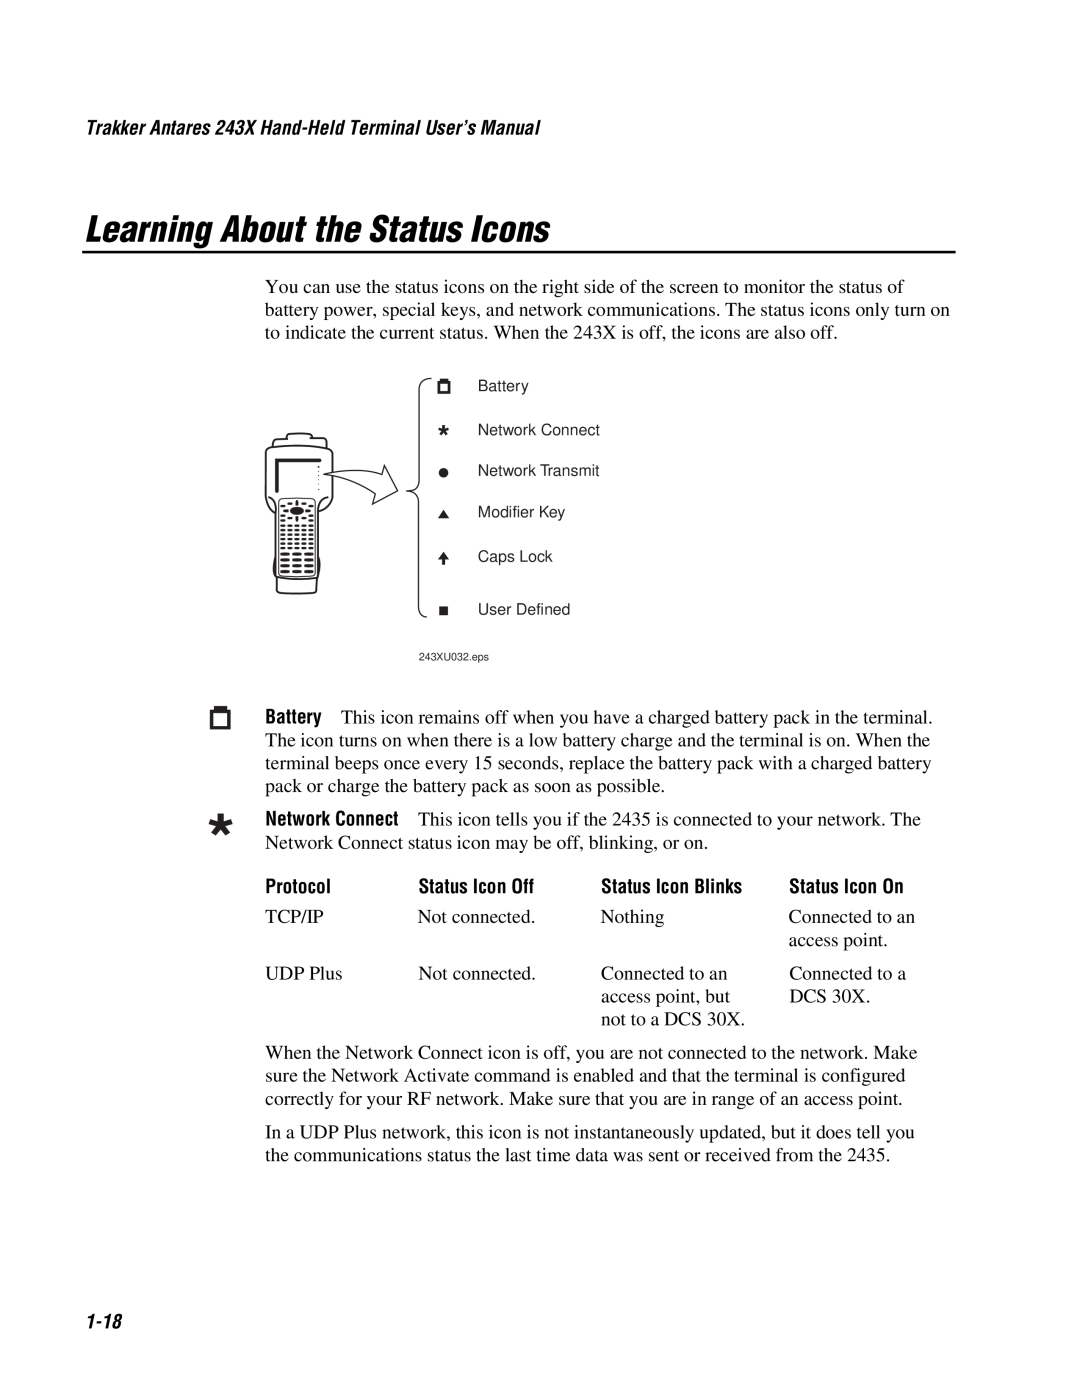 IBM 243X user manual Learning About the Status Icons, Protocol, Status Icon Off, Status Icon Blinks, 1-18 